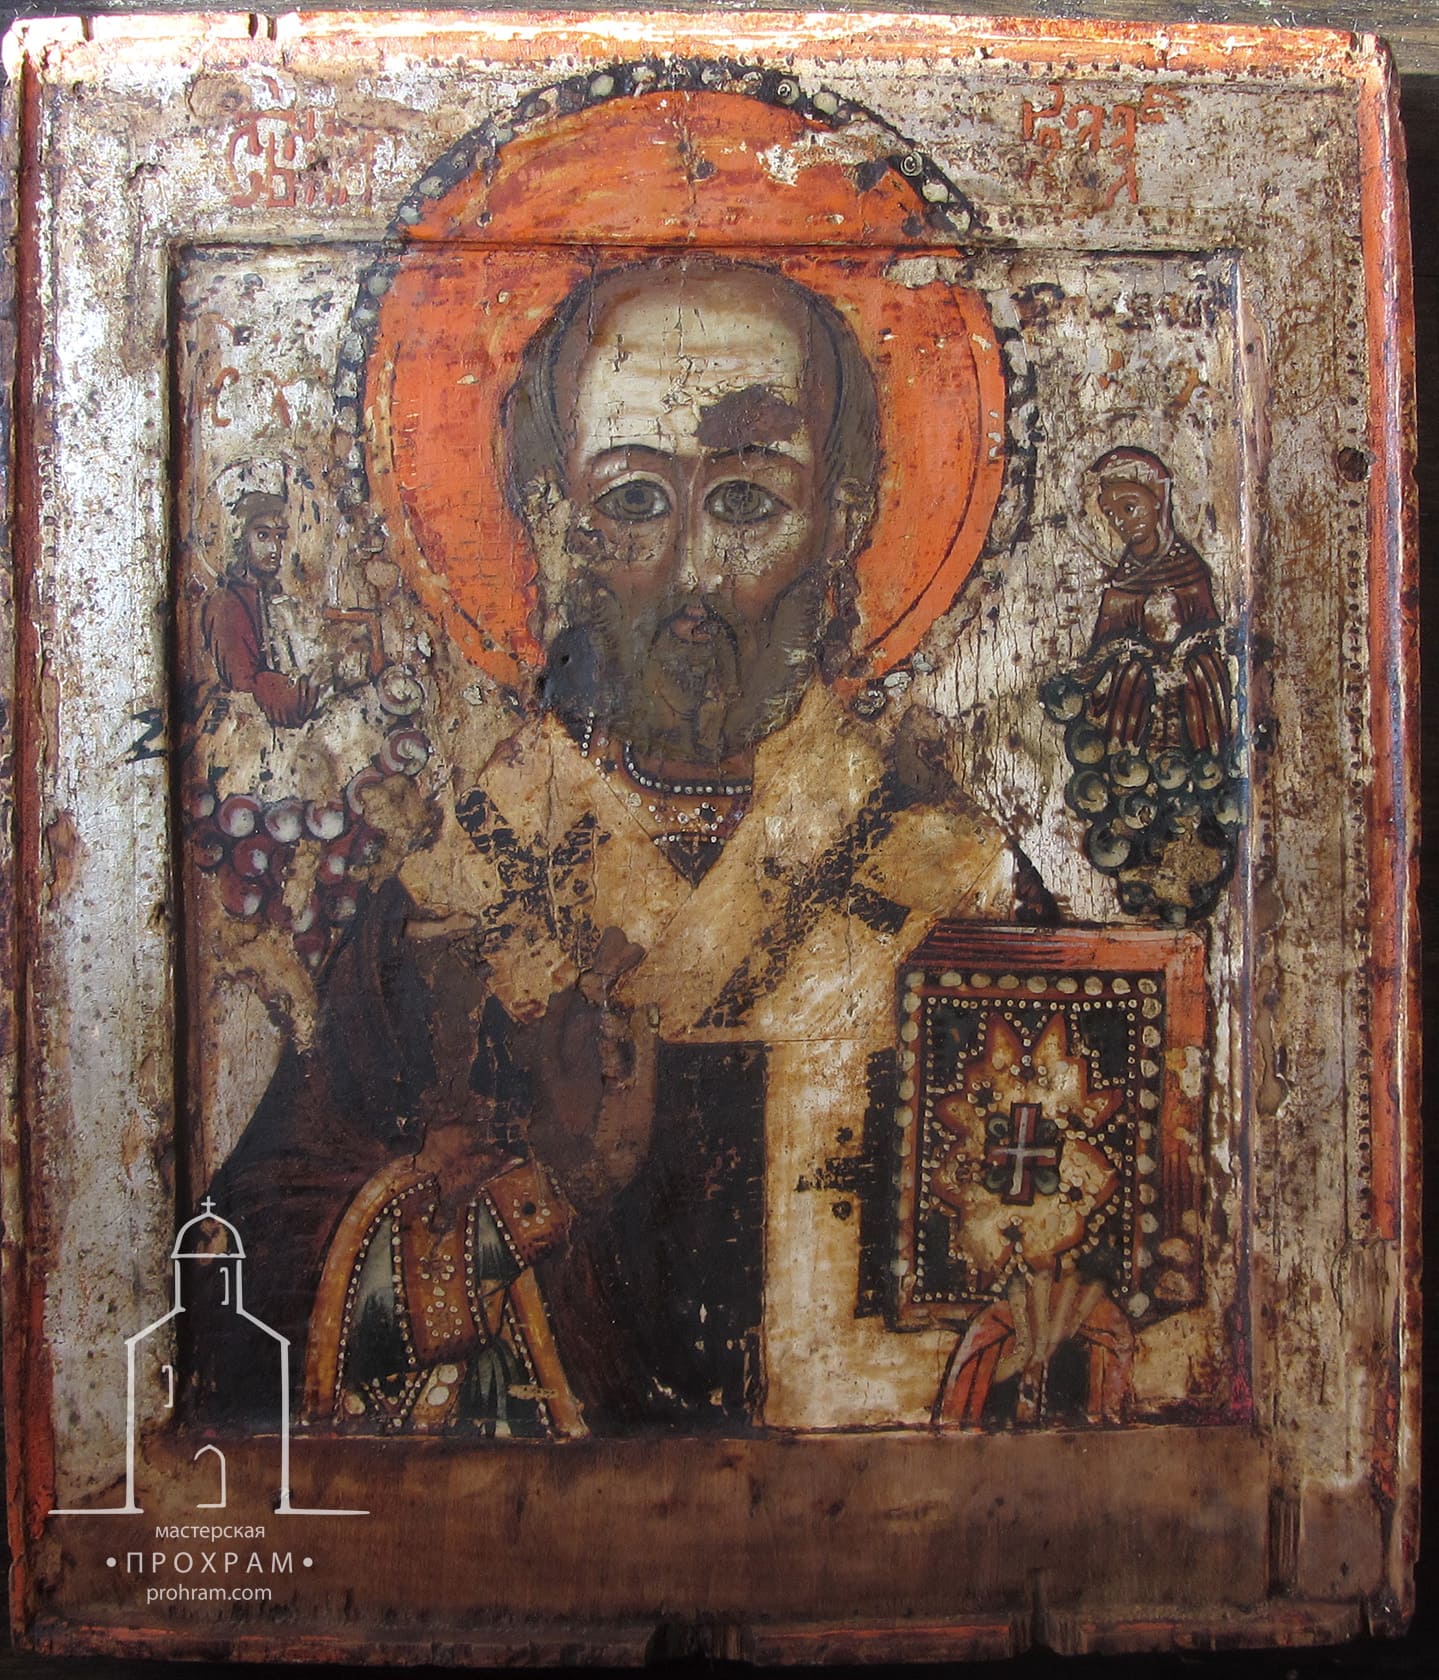 restoration, restoration of icons, Icon of St. Nicholas the Wonderworker, northern school of painting, the 19th century, restoration of icons stages